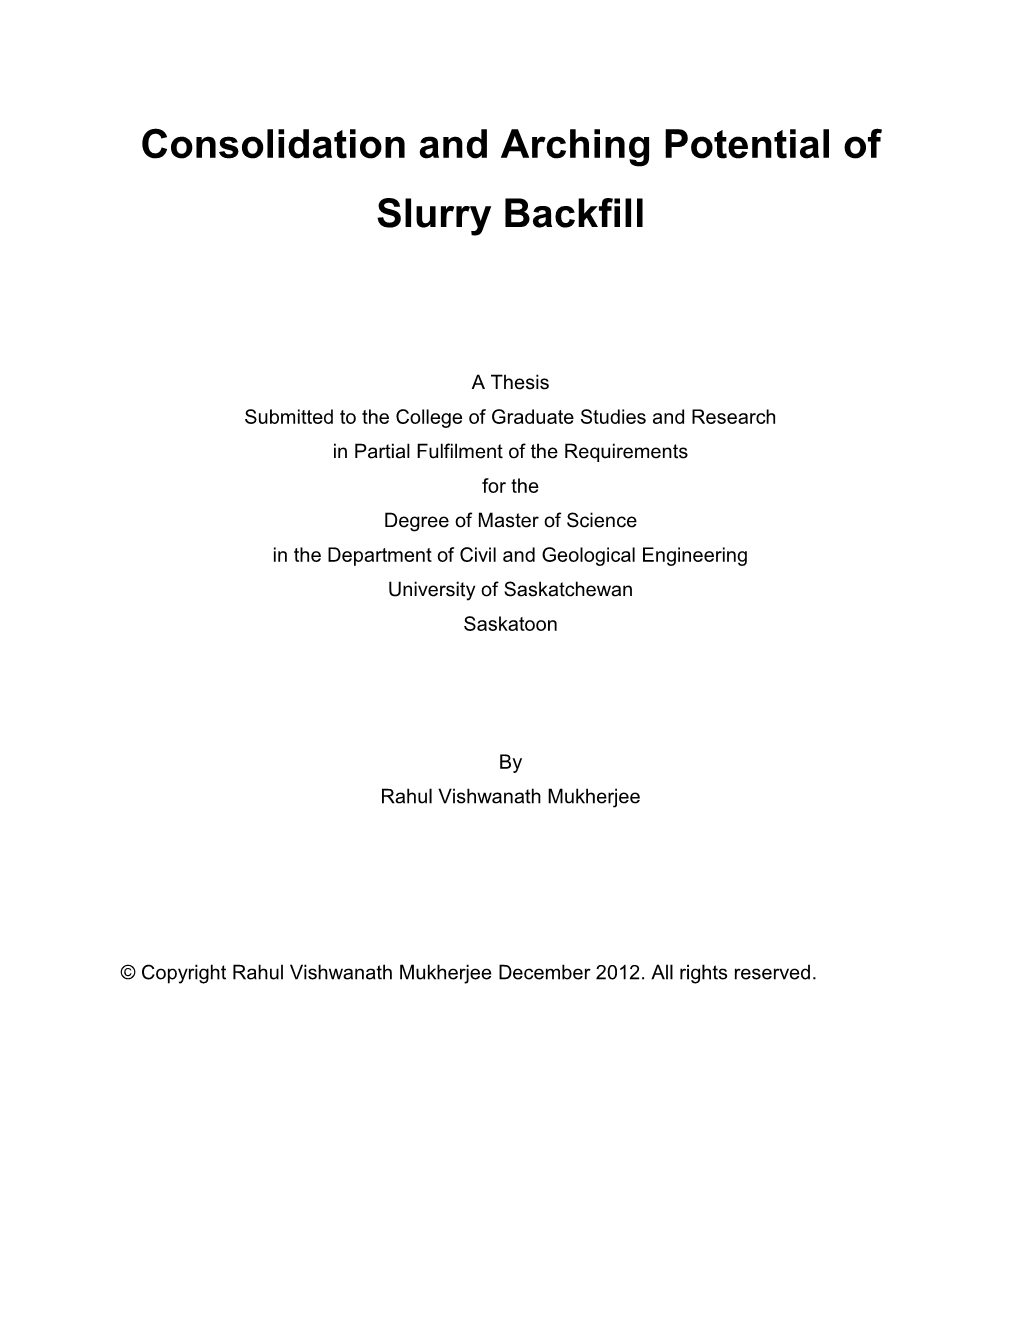 Consolidation and Arching Potential of Slurry Backfill